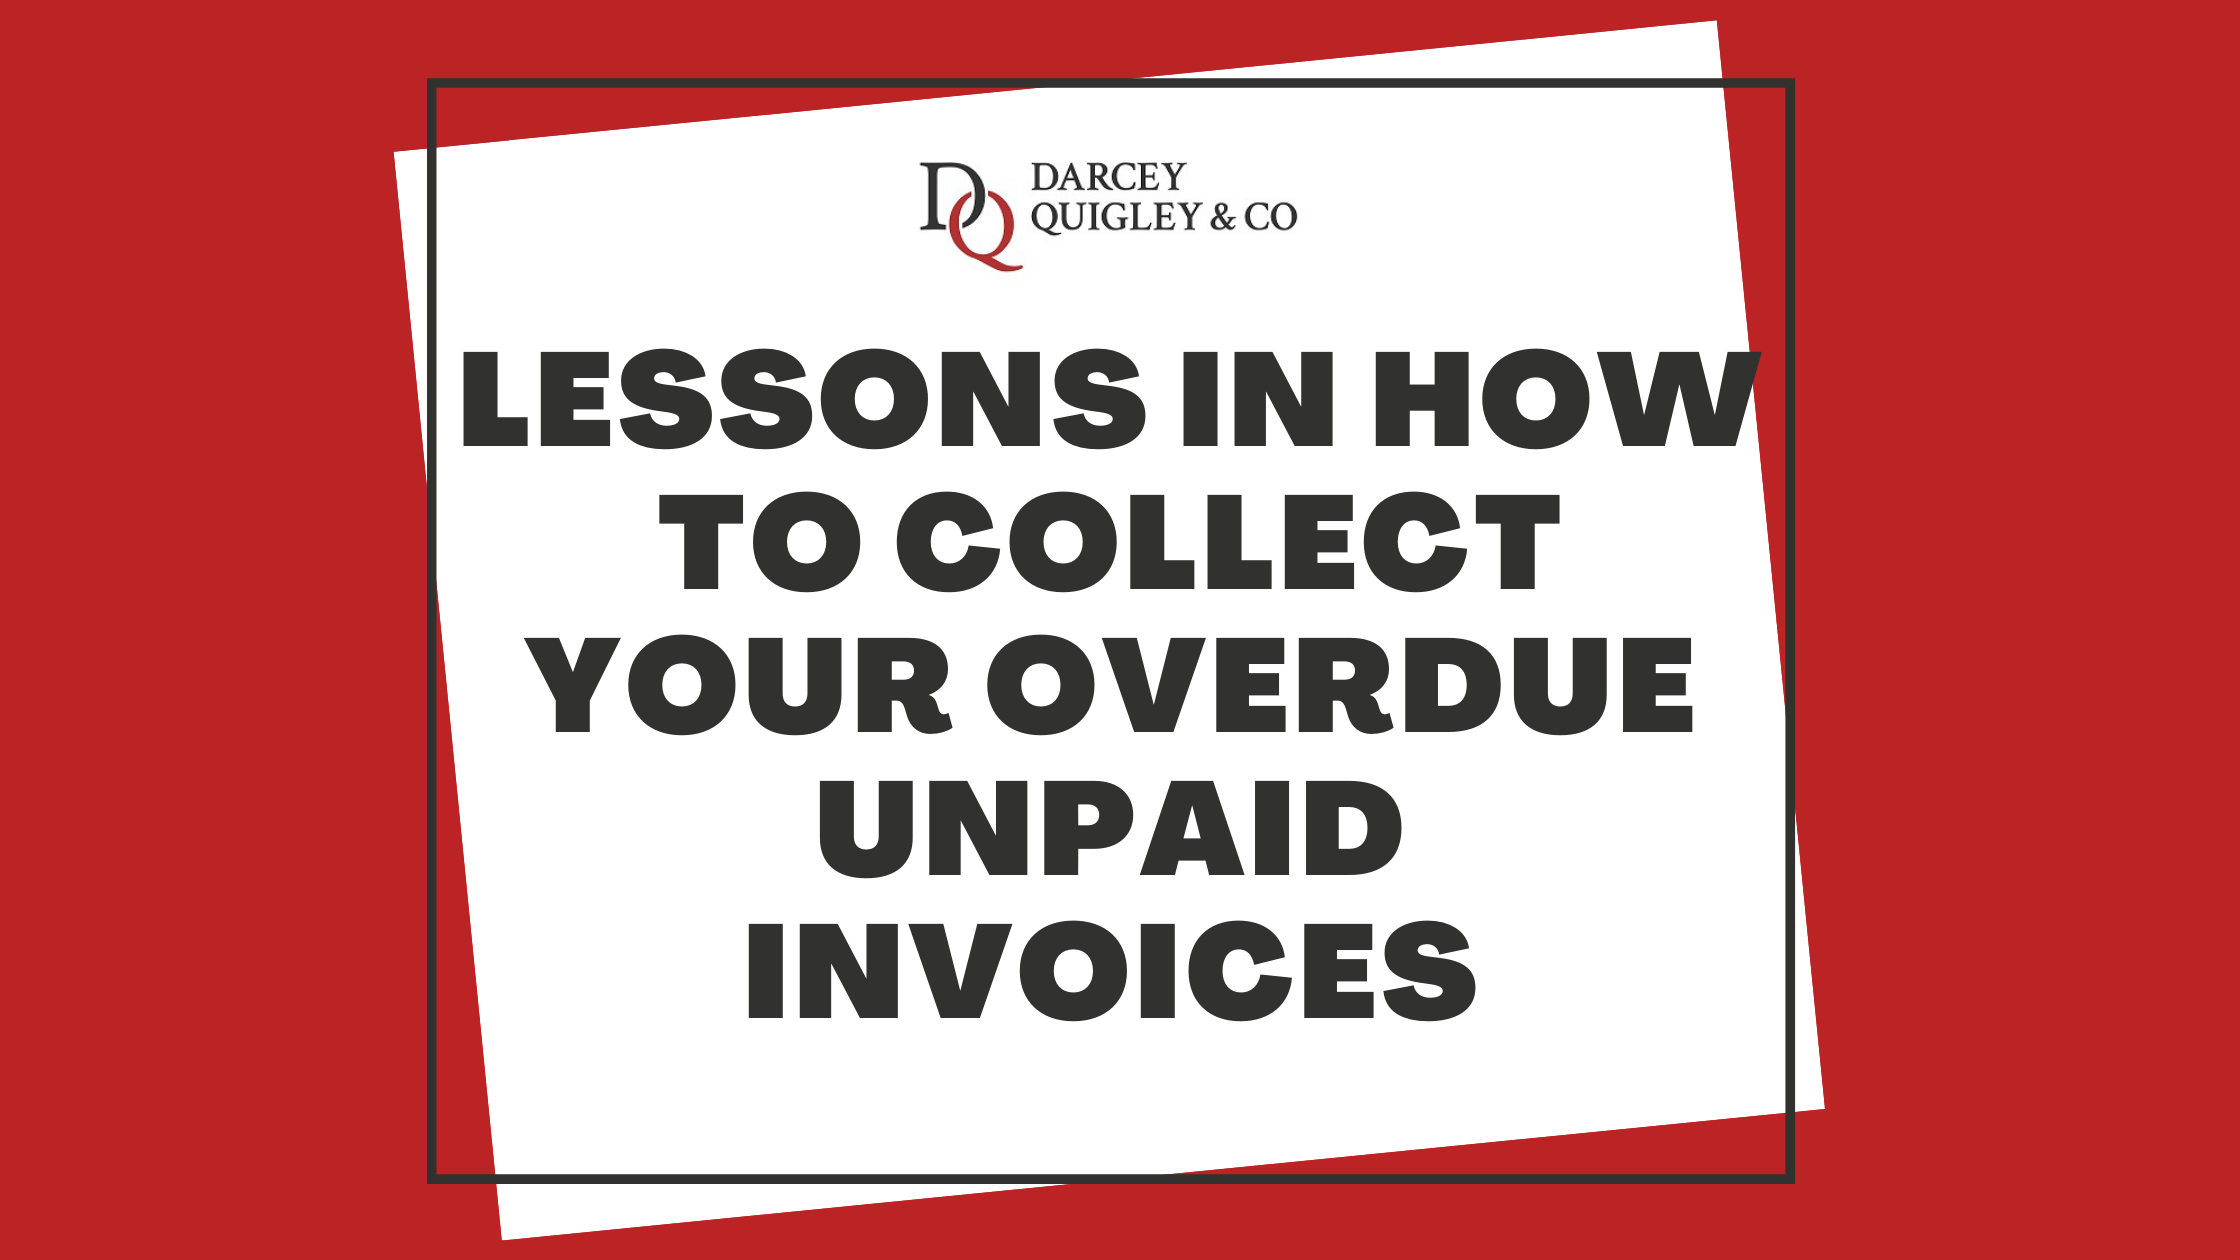 Image for our recent blog post discussing how to collect overdue unpaid invoices